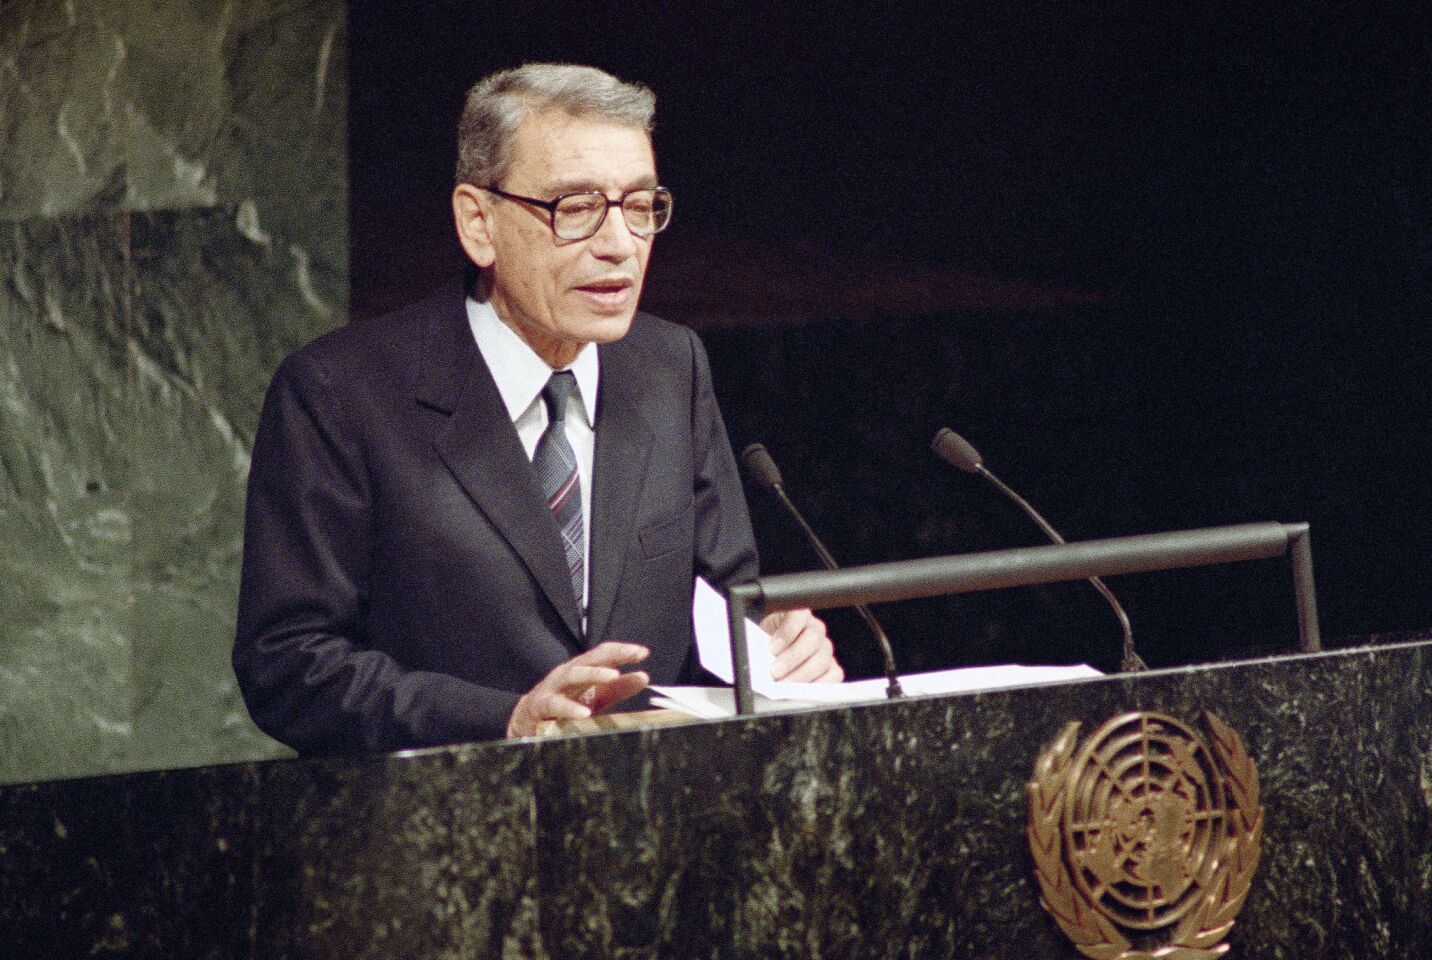 The Egyptian diplomat helped negotiate his country's landmark peace deal with Israel but then clashed with the United States when he served a single term as U.N. secretary-general. He was 93. Full obituary